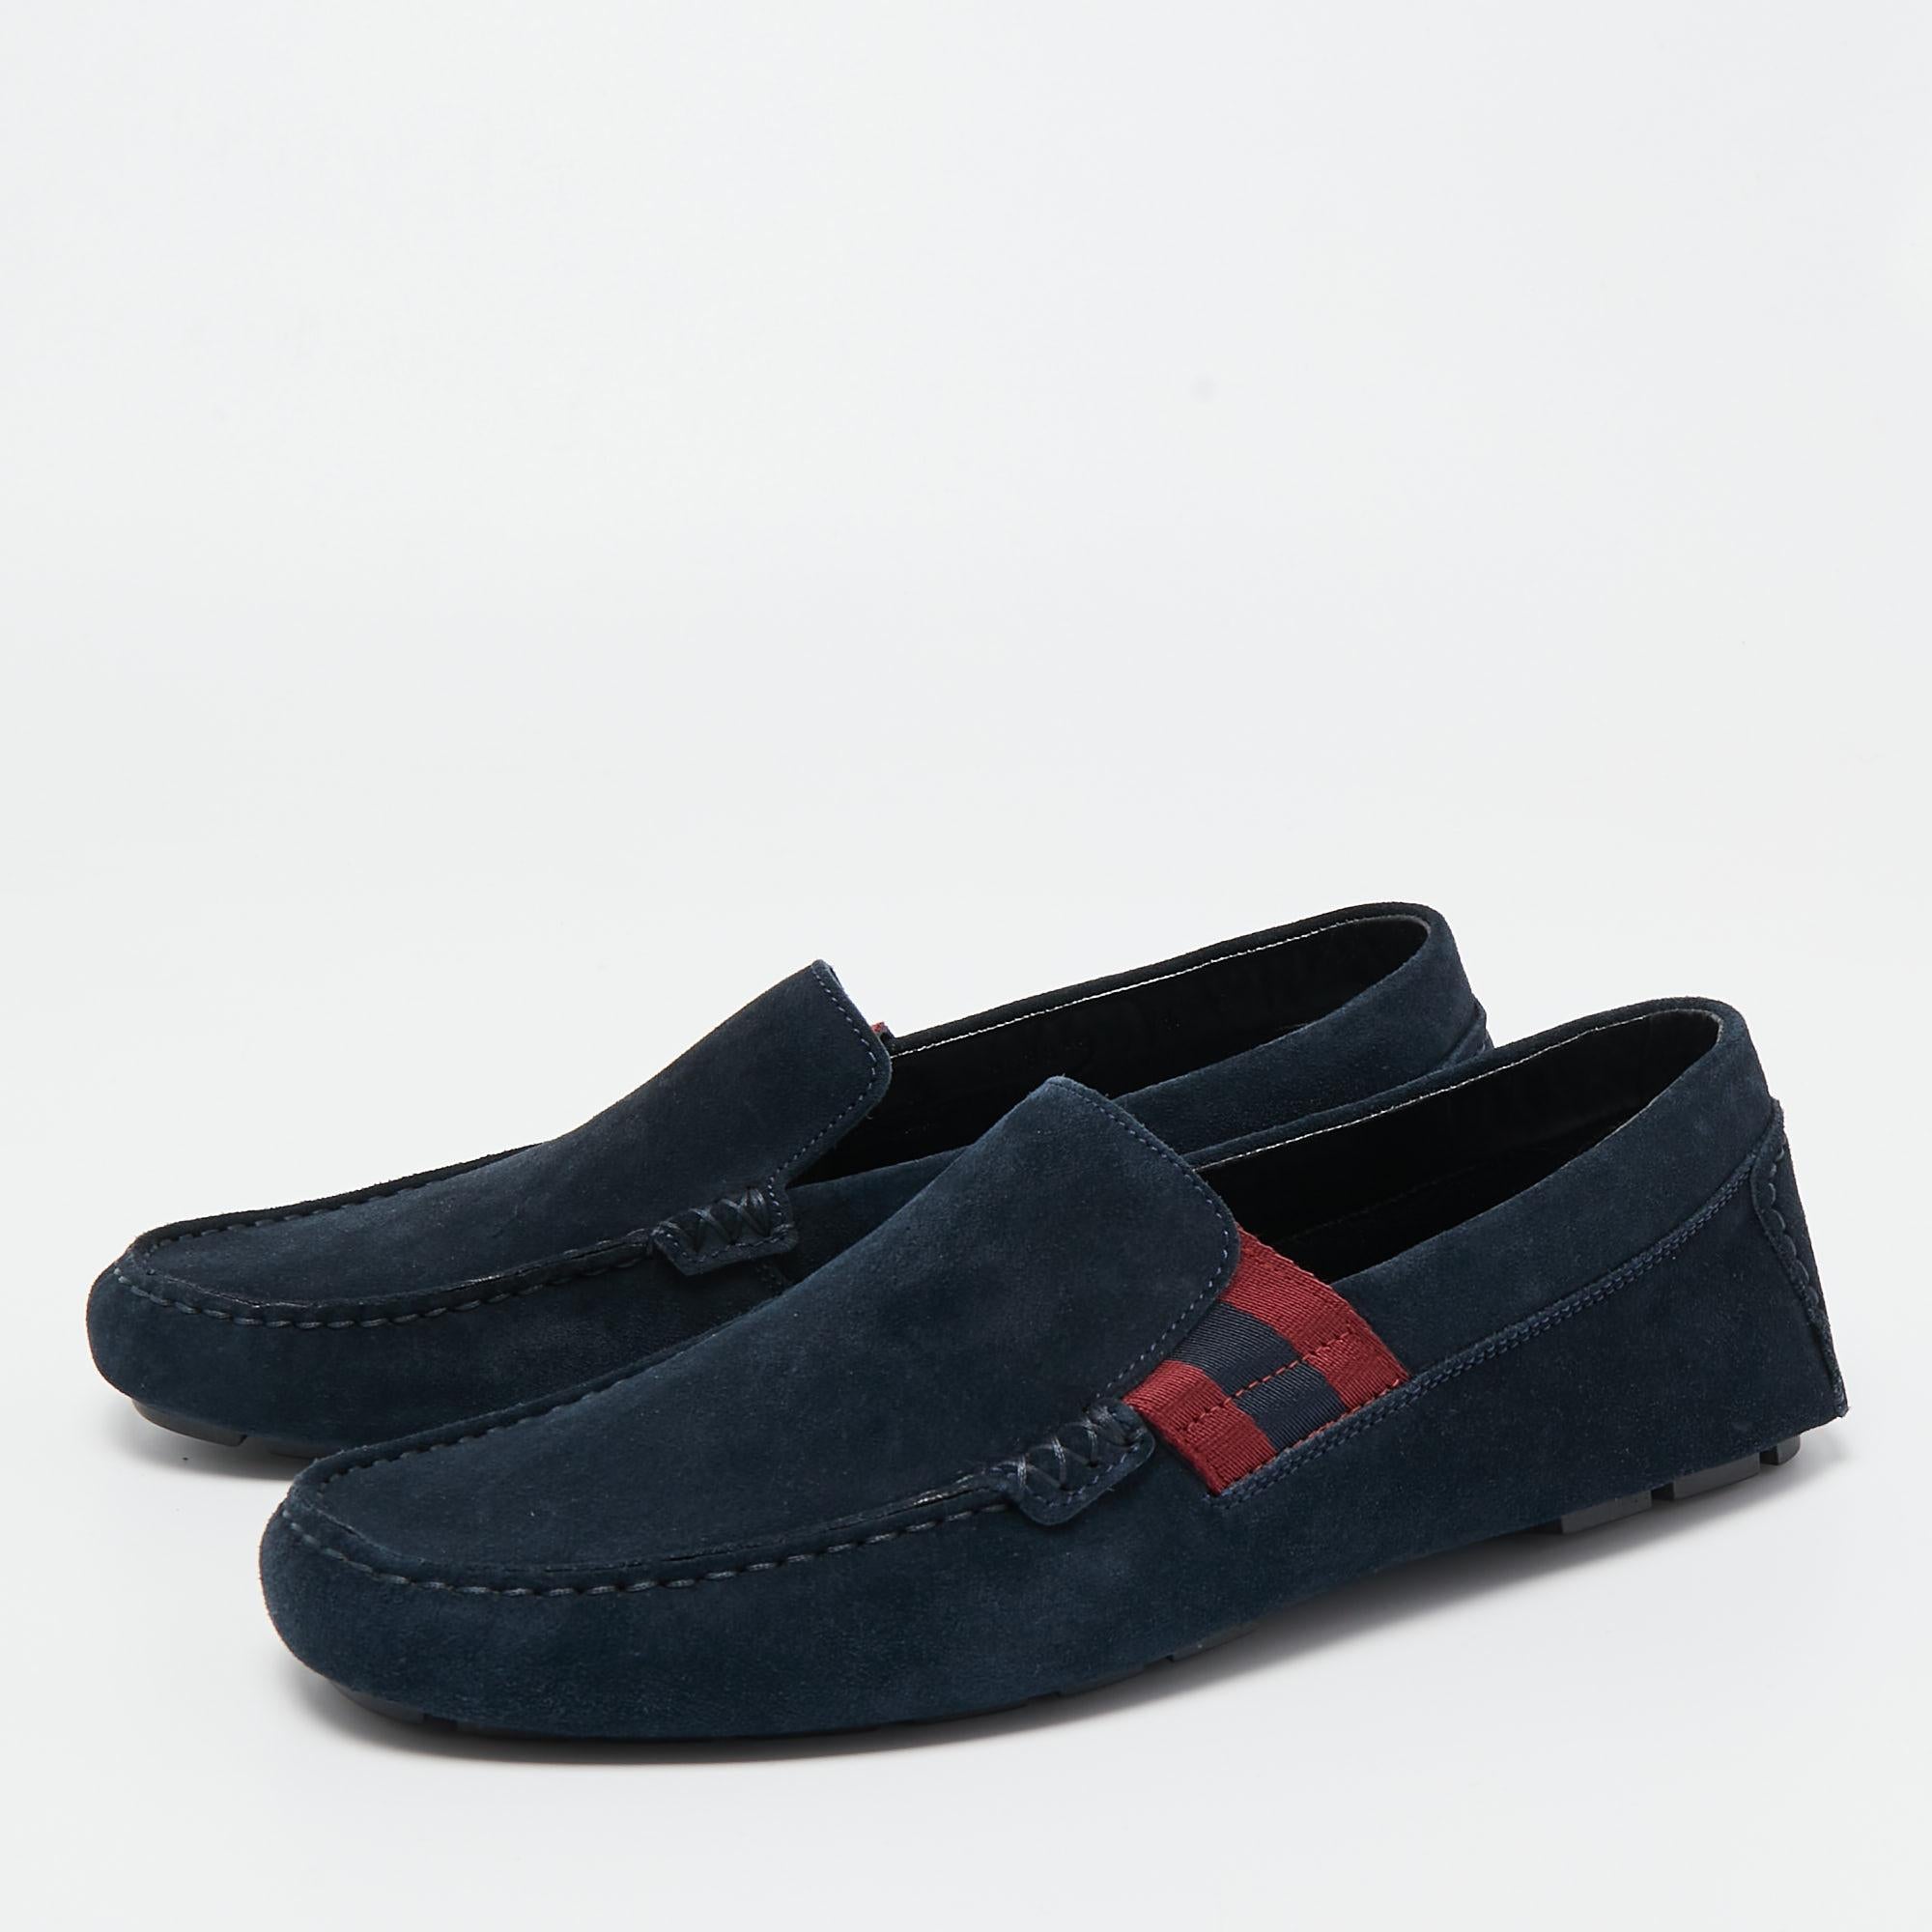 Practical, fashionable, and durable—these Gucci dark blue loafers are carefully built to be fine companions to your everyday style. They come made using the best materials to be a prized buy.


Includes
Original Dustbag, Original Box